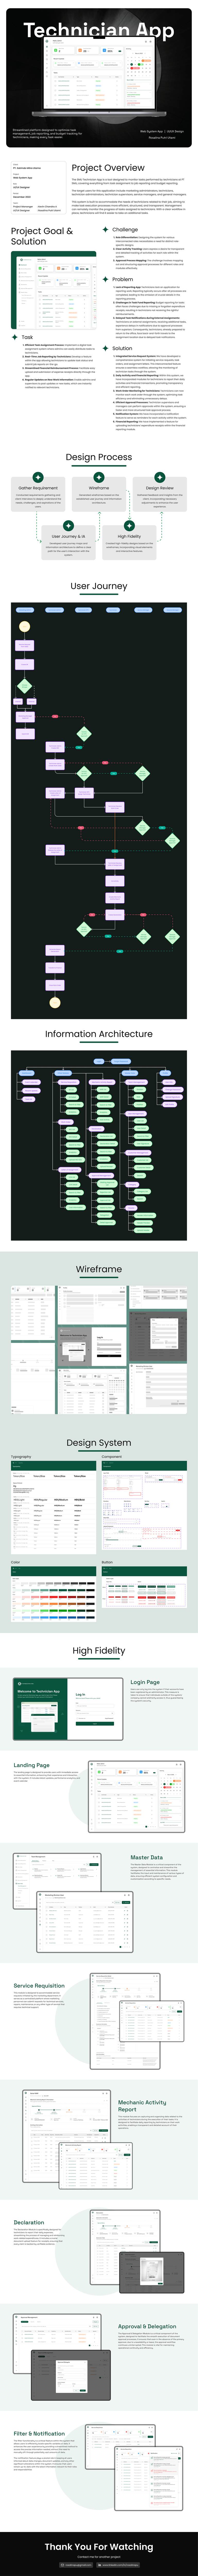 web application UI/UX real project design system user journey information architechture wireframes user experience Figma